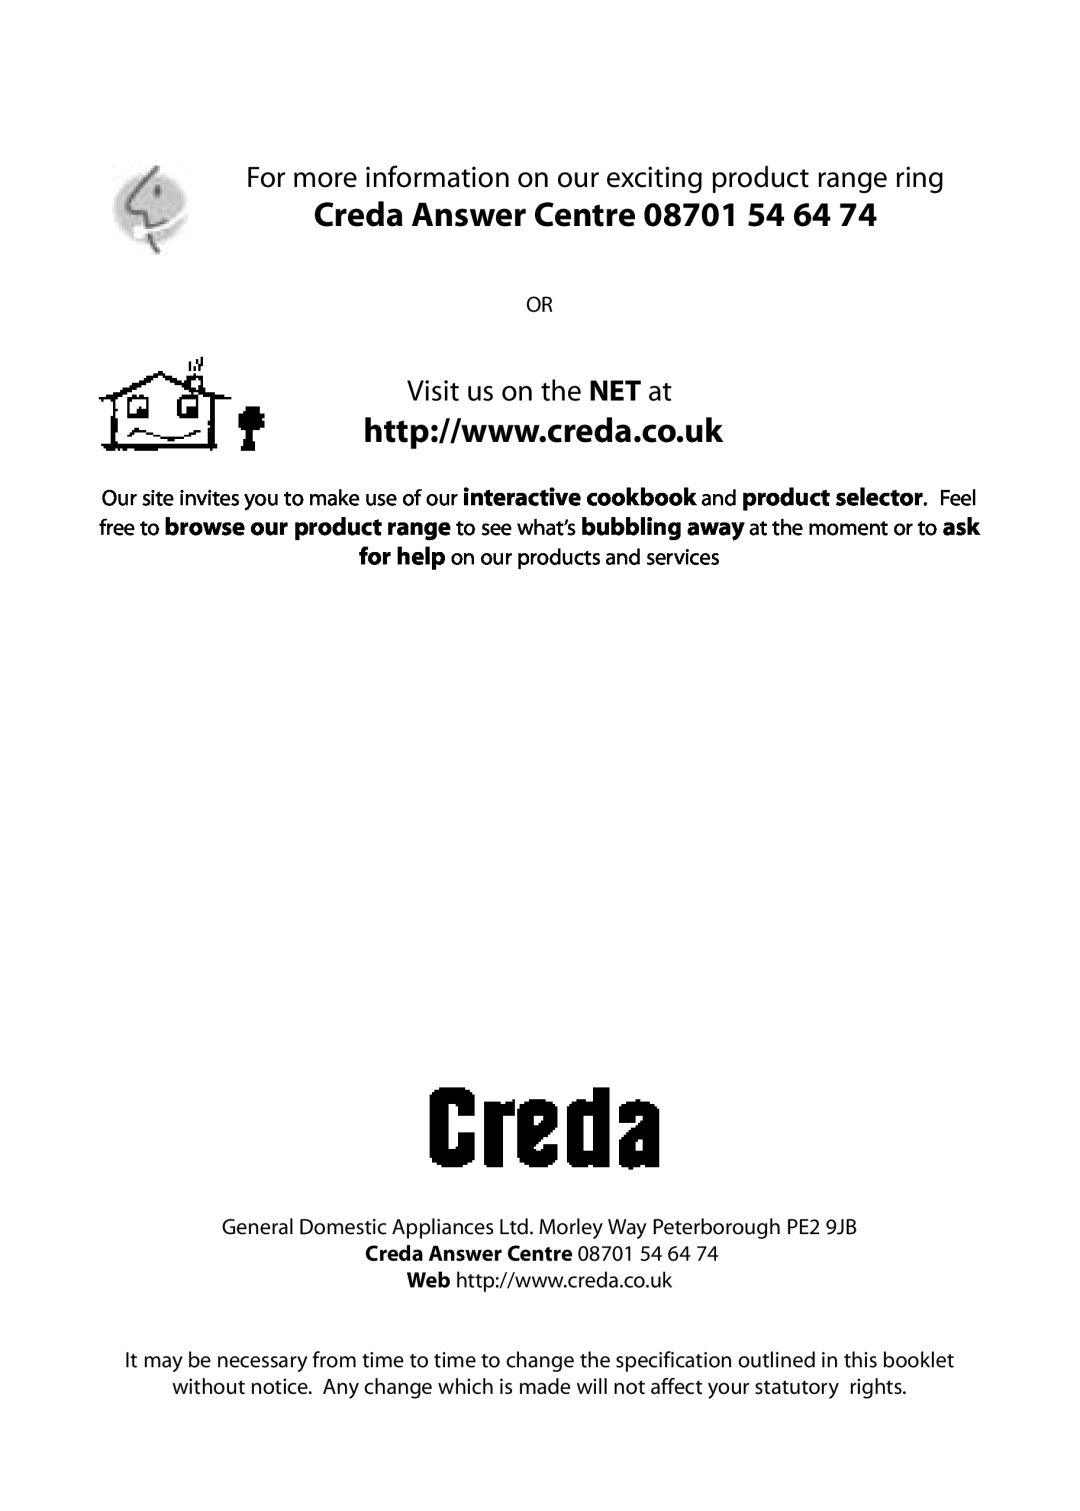 Creda E530E/R530E manual Creda Answer Centre 08701 54 64, For more information on our exciting product range ring 